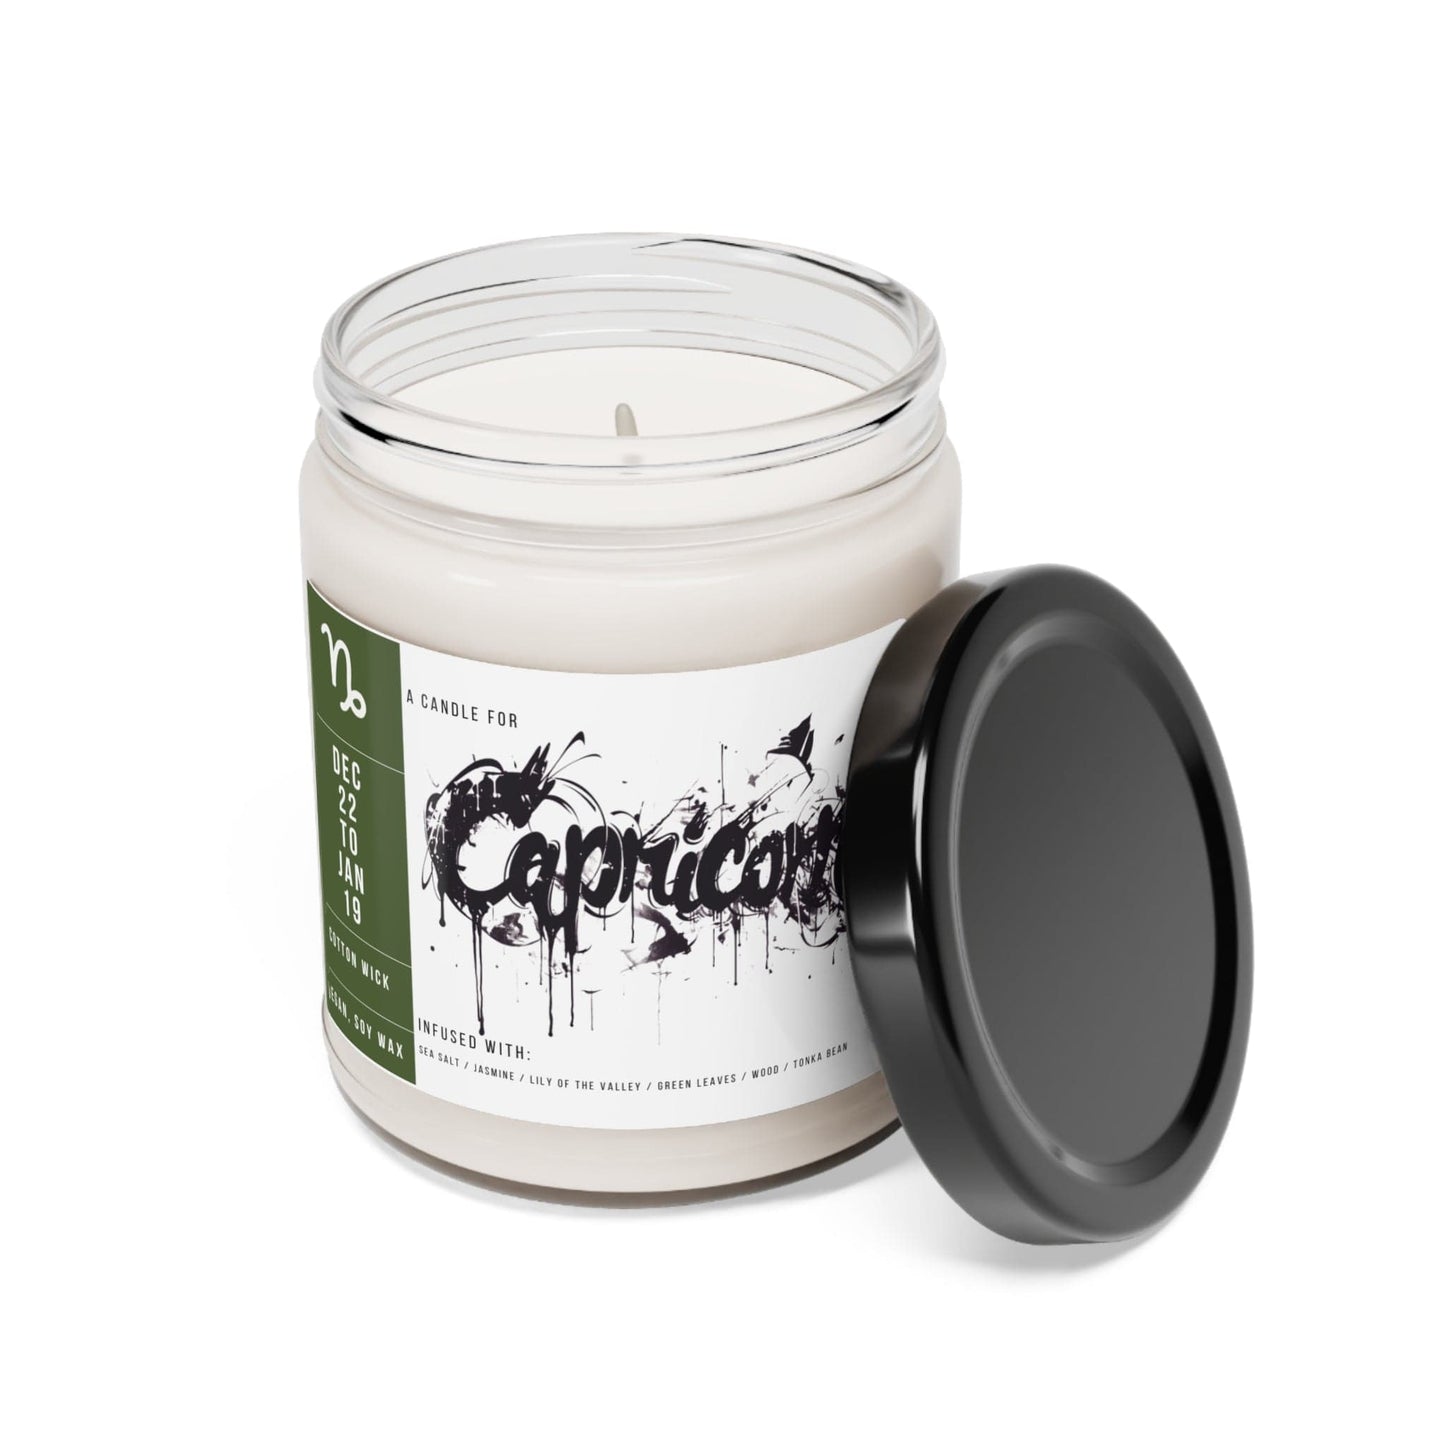 Home Decor Capricorn Zodiac Scented Soy Candle Collection – Steadfast Mountain